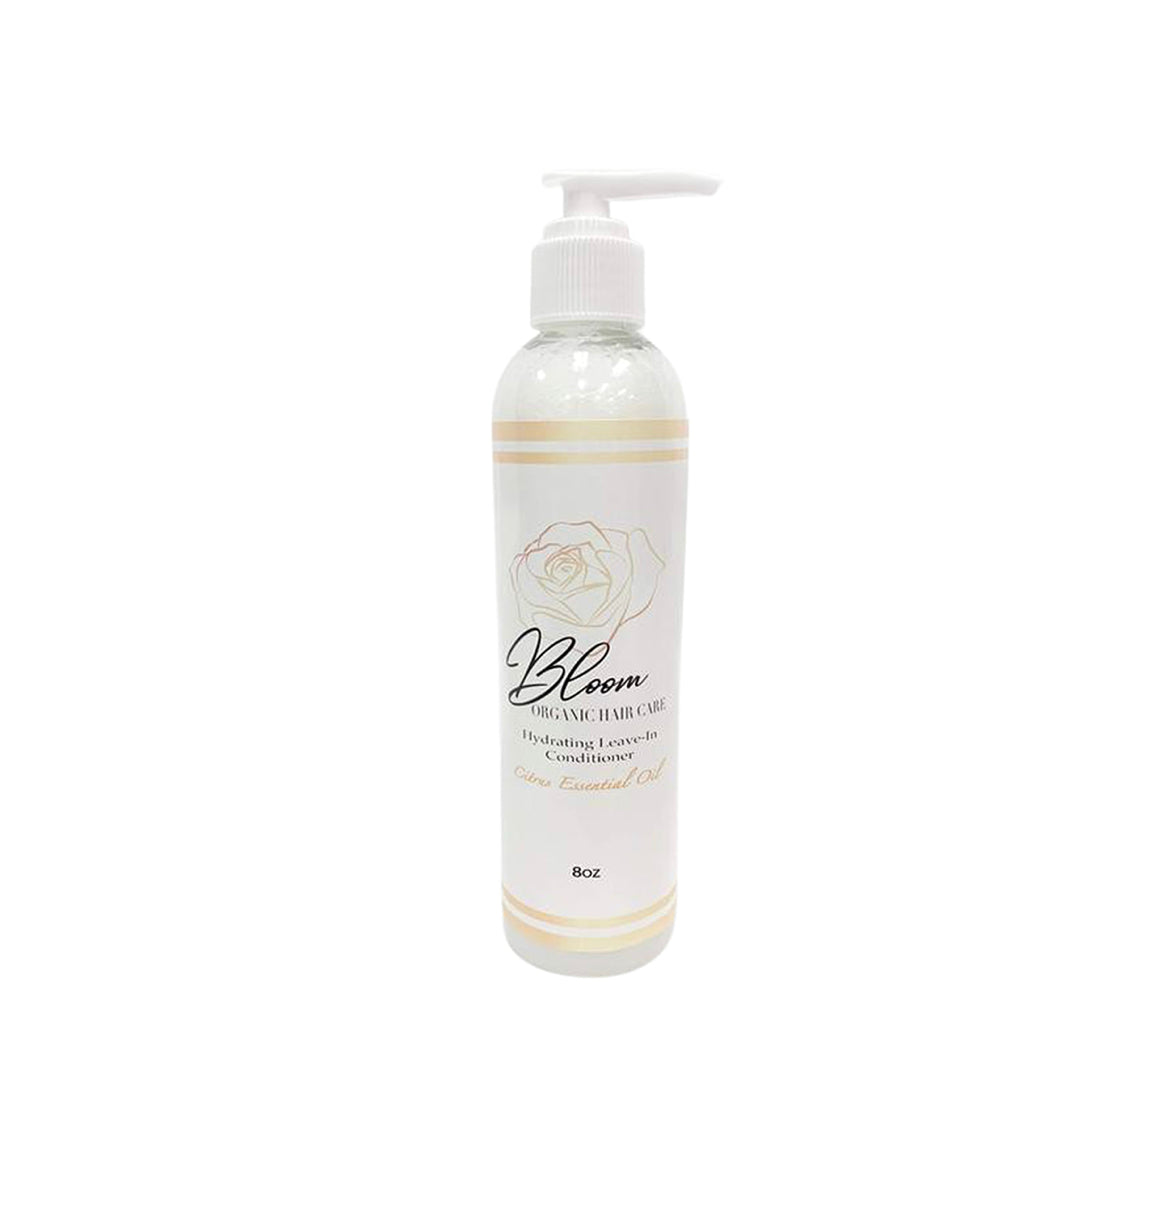 HYDRATING LEAVE-IN CONDITIONER